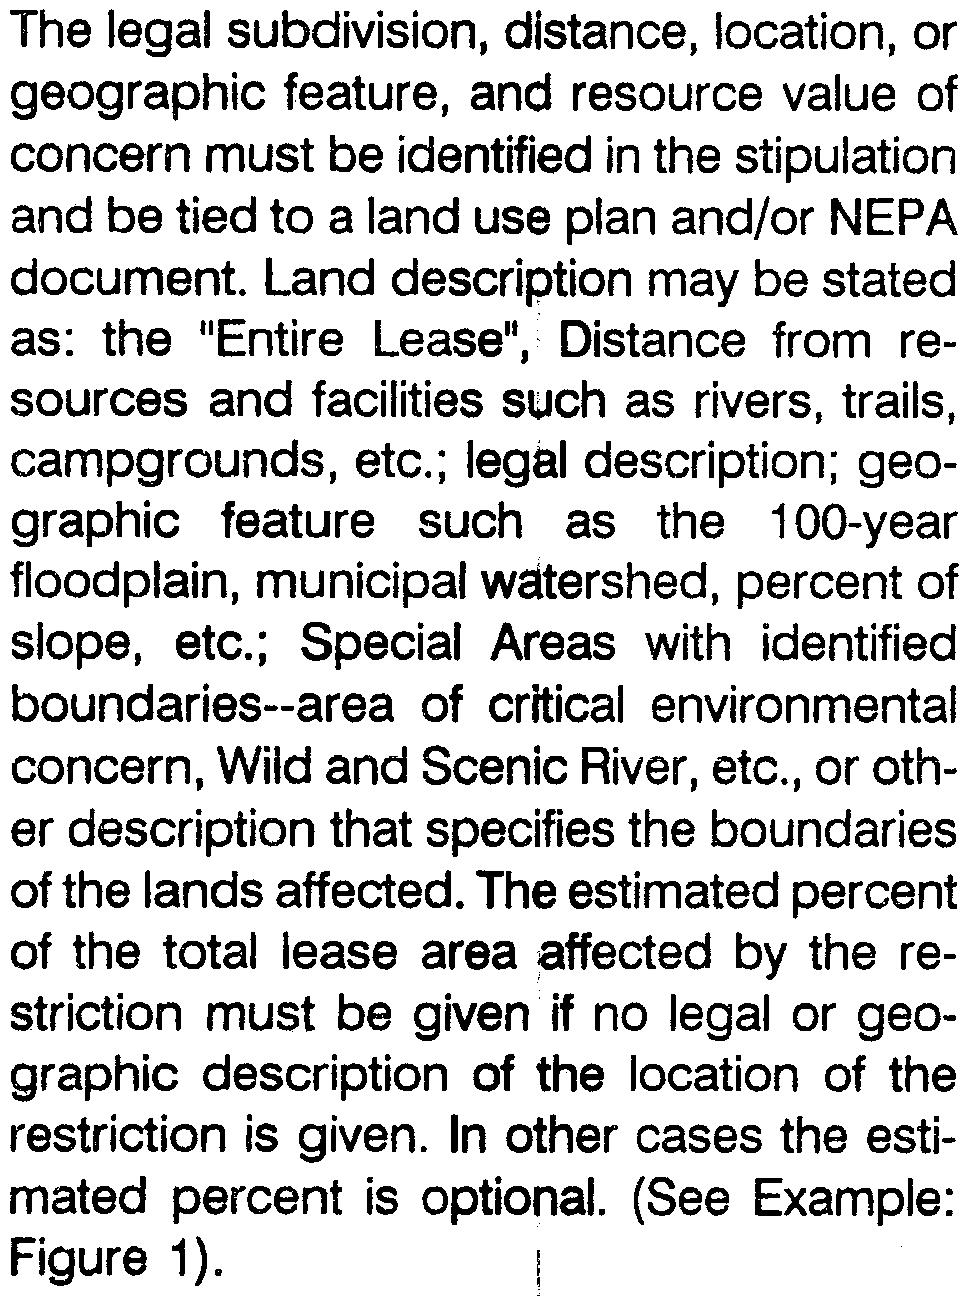 , The legal subdivision, distance, location, or geographic feature, and resource value of concern must be identified in the stipulation and be tied to a land use plan and/or NEPA document.